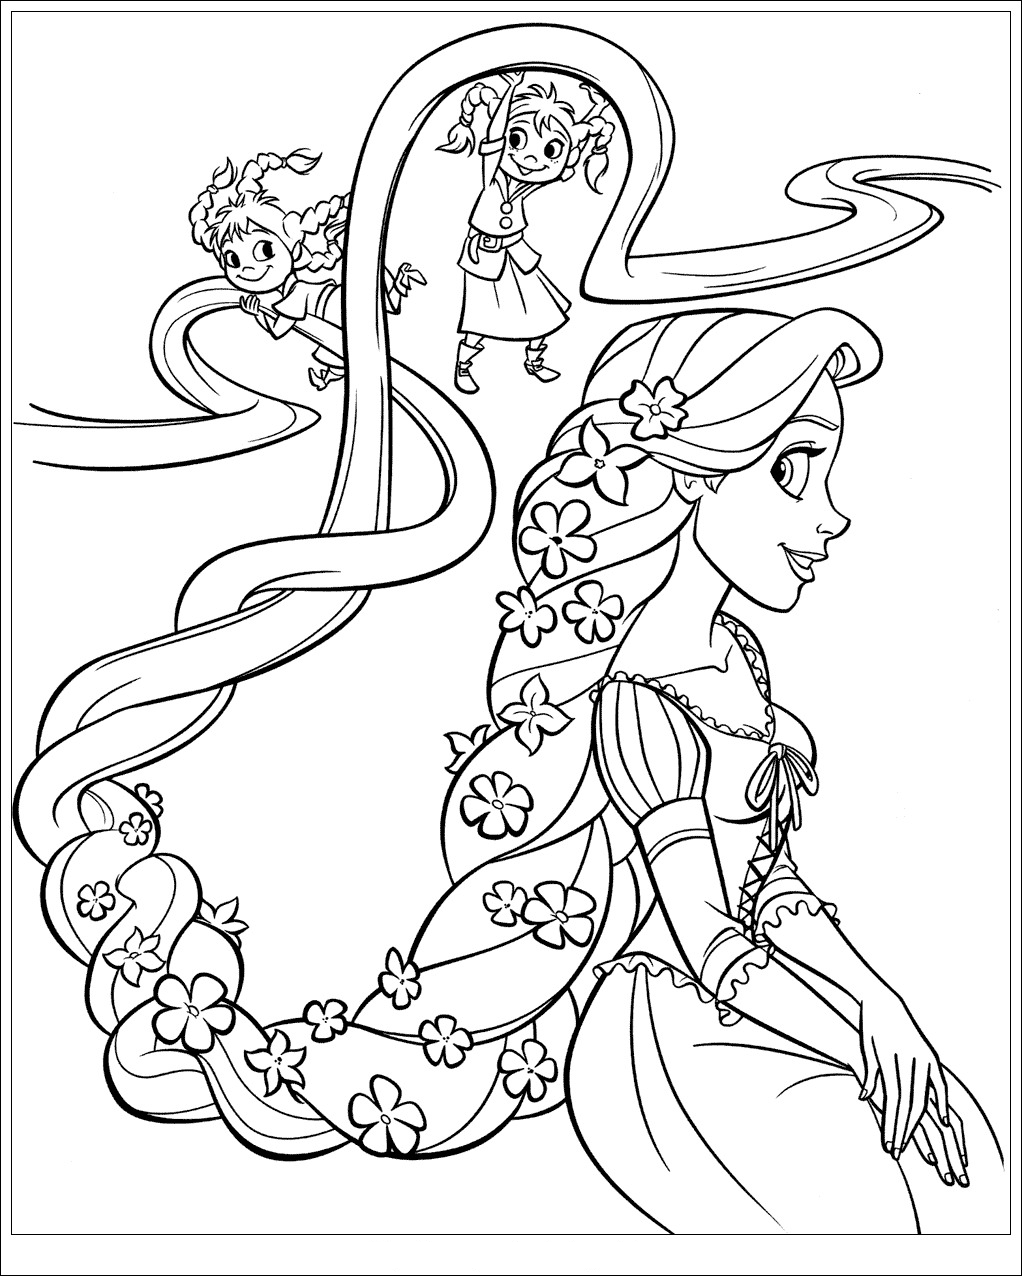 Tangled free to color for children - Tangled Kids Coloring ...